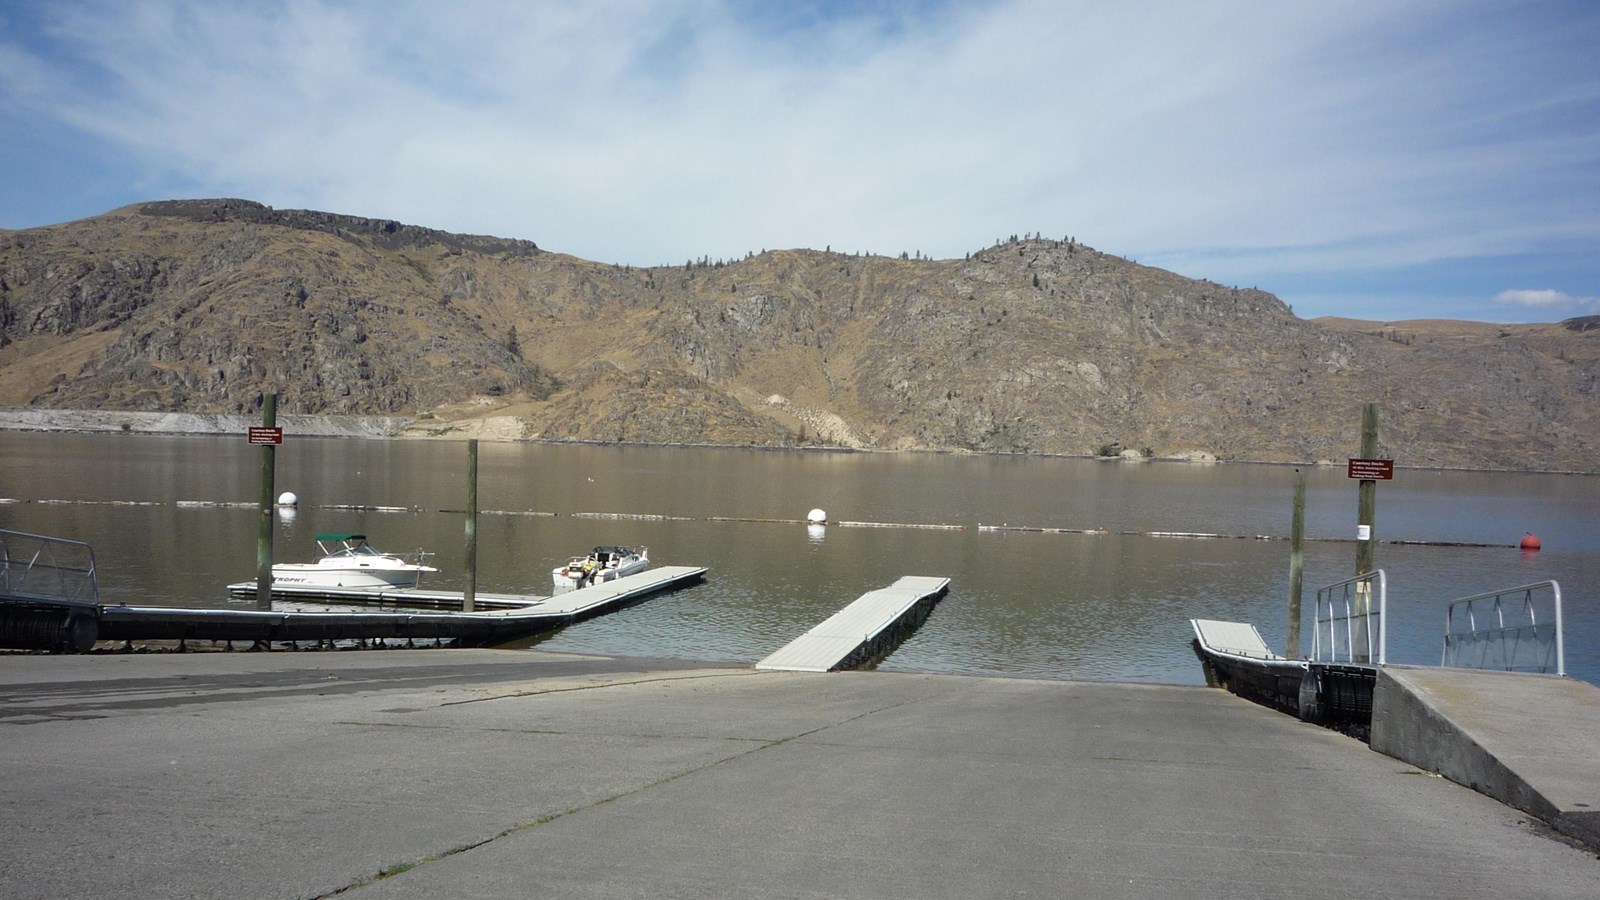 A view of the paved boat ramp with adjacent docks. An arc of log booms and buoys are visible beyond.